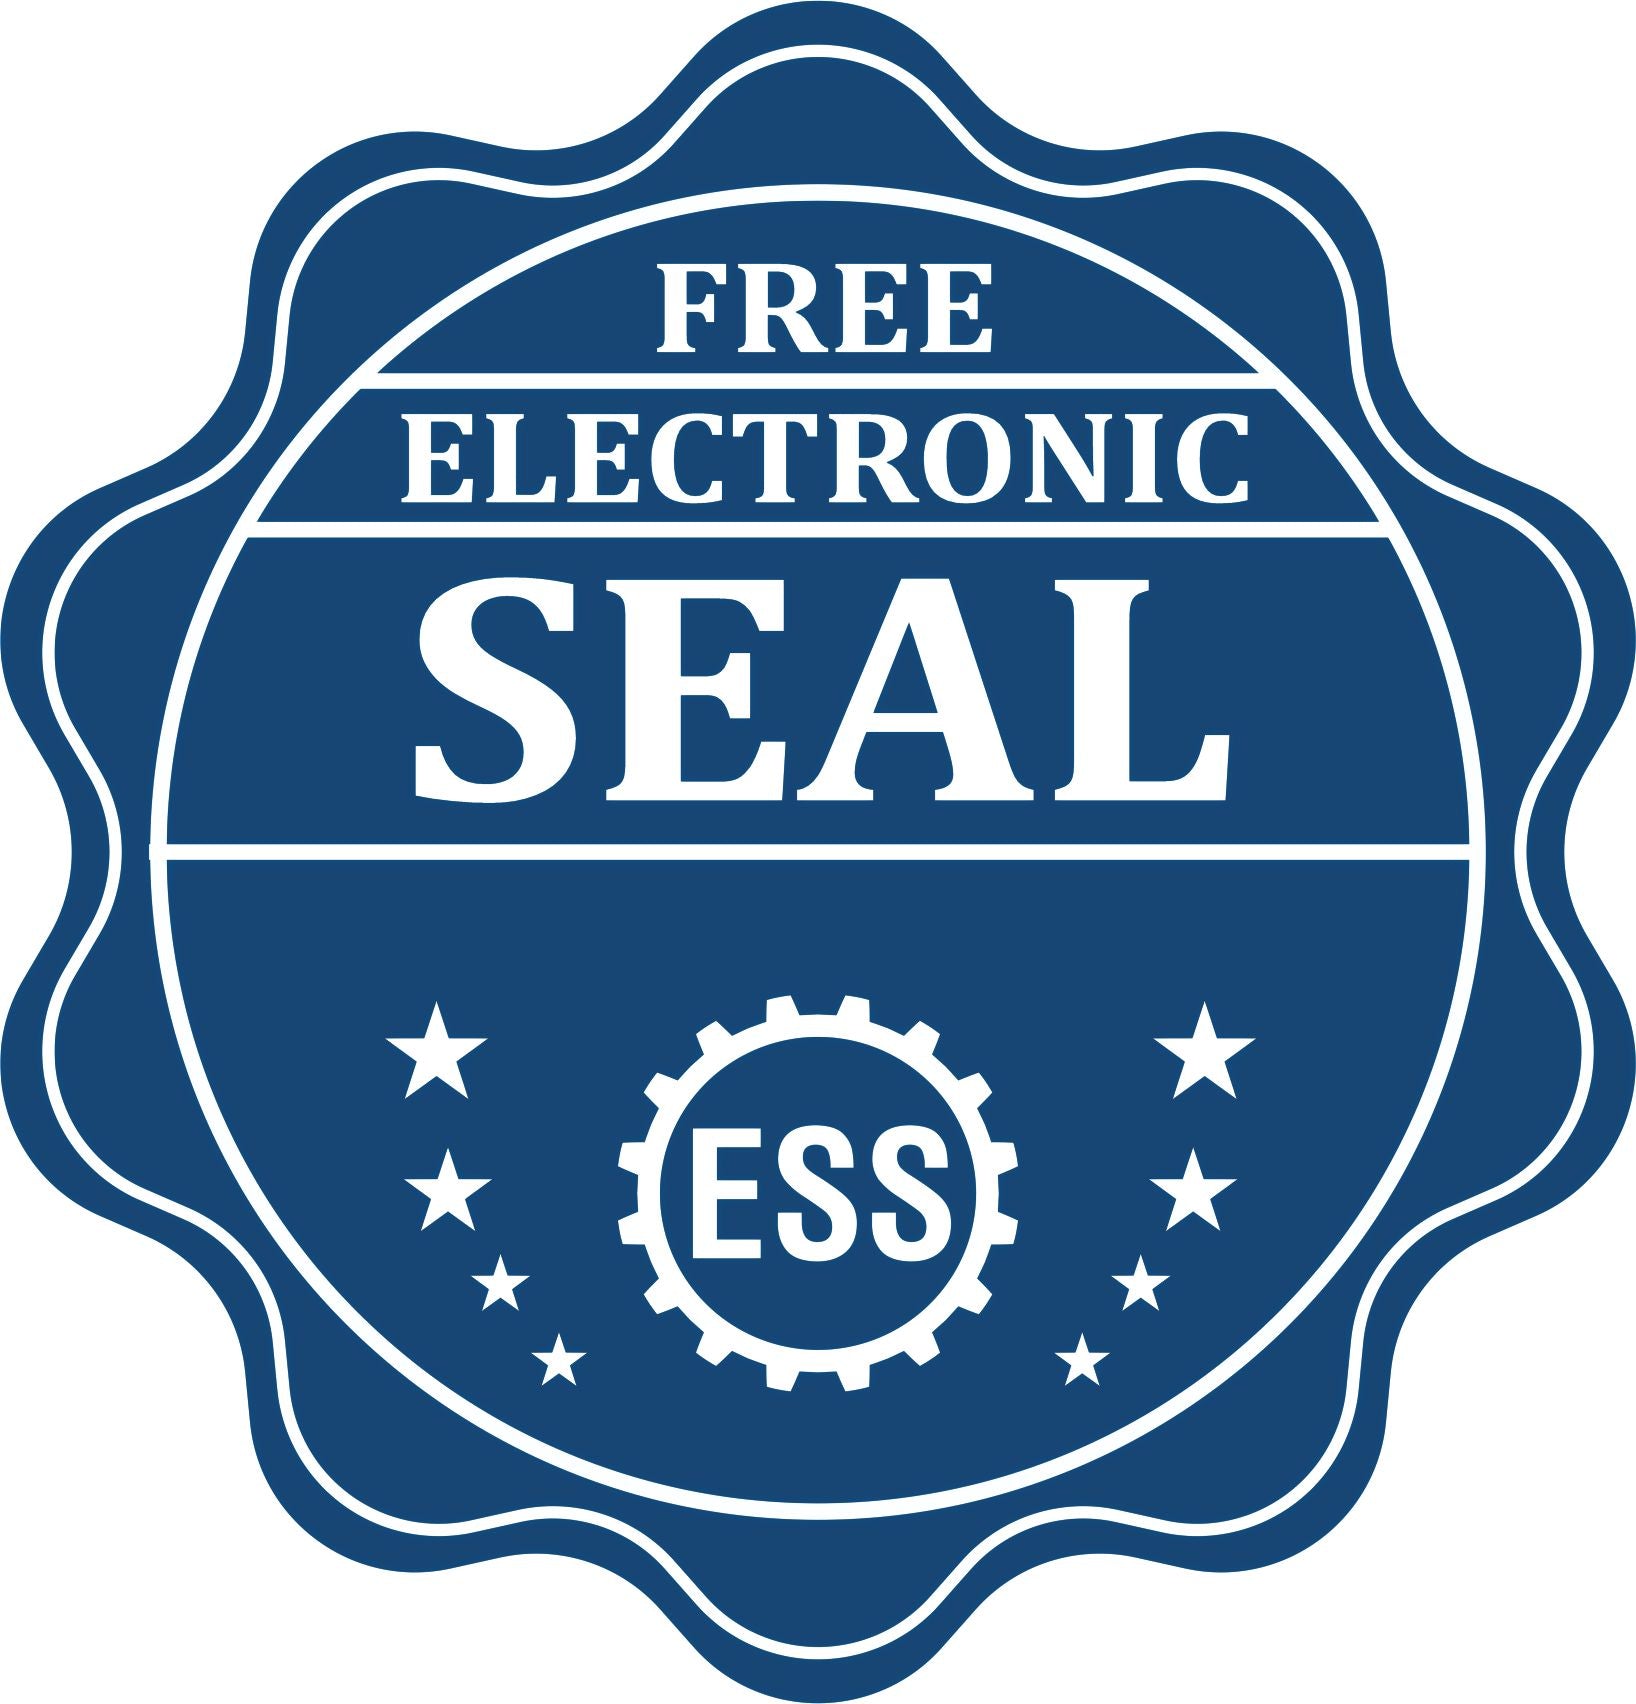 A badge showing a free electronic seal for the Soft Alaska Professional Geologist Seal with stars and the ESS gear on the emblem.